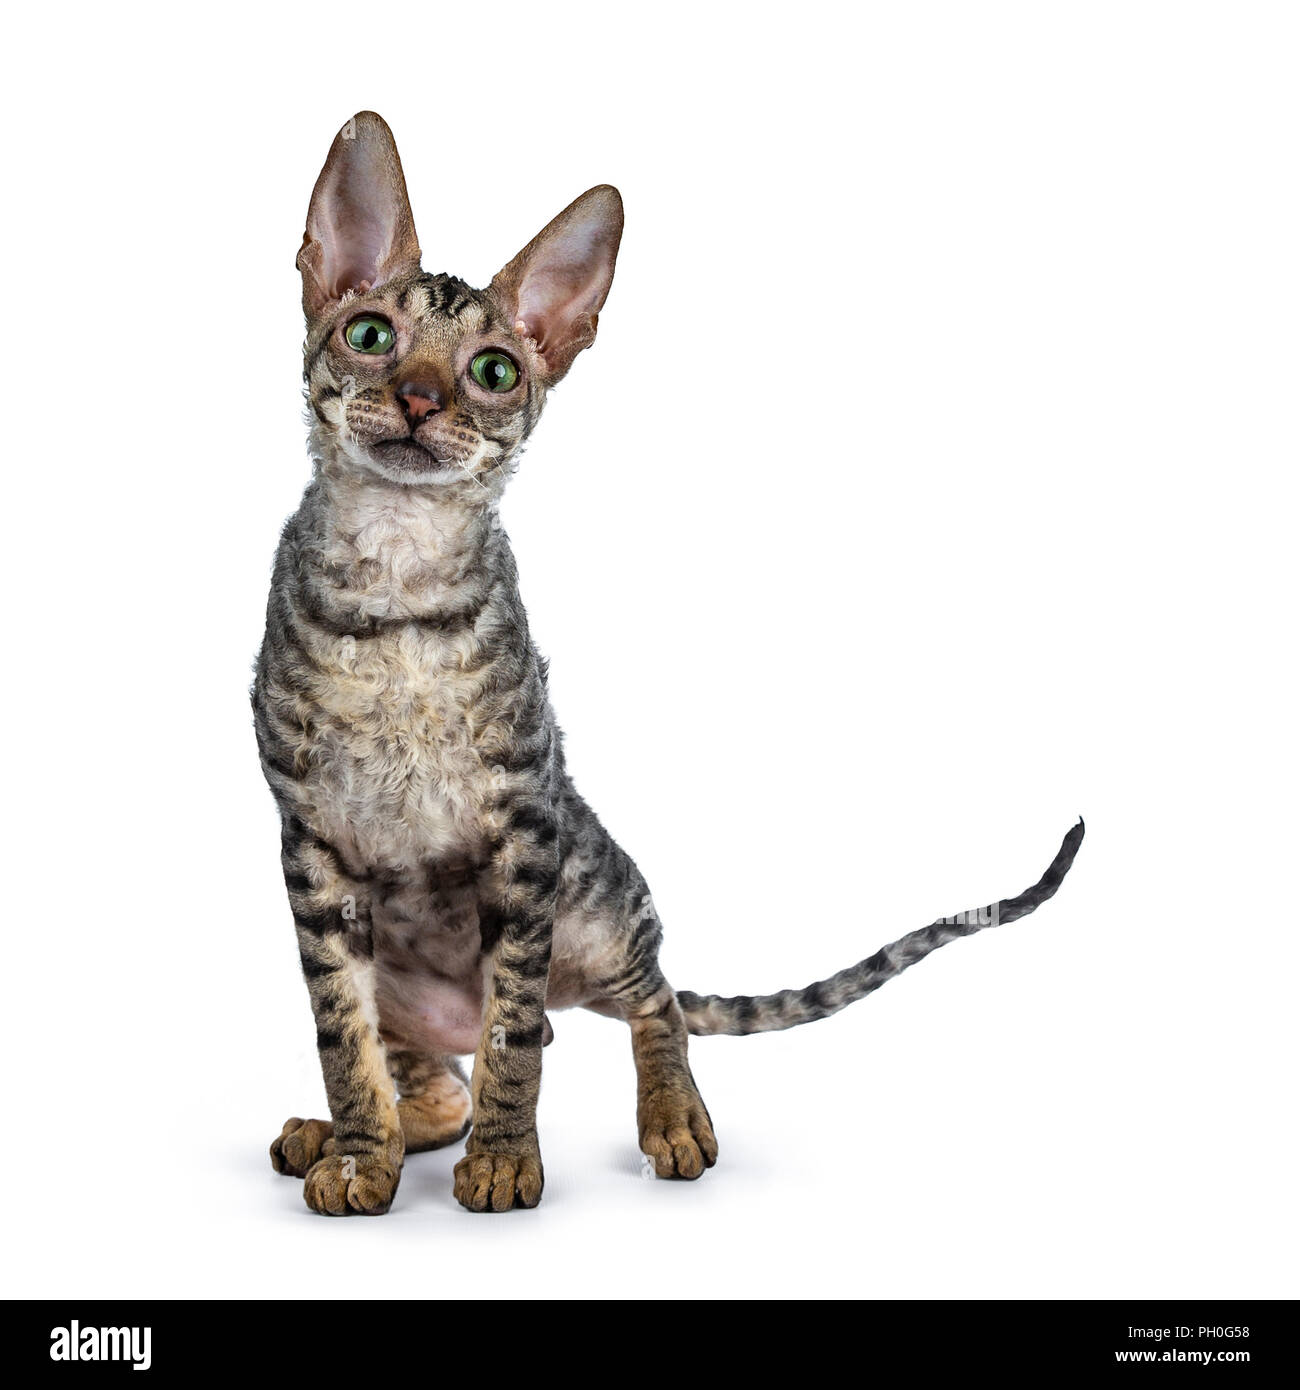 Black tabby Cornish Rex kitten standing facing front looking very curiously in lens with green eyes isolated on white background Stock Photo